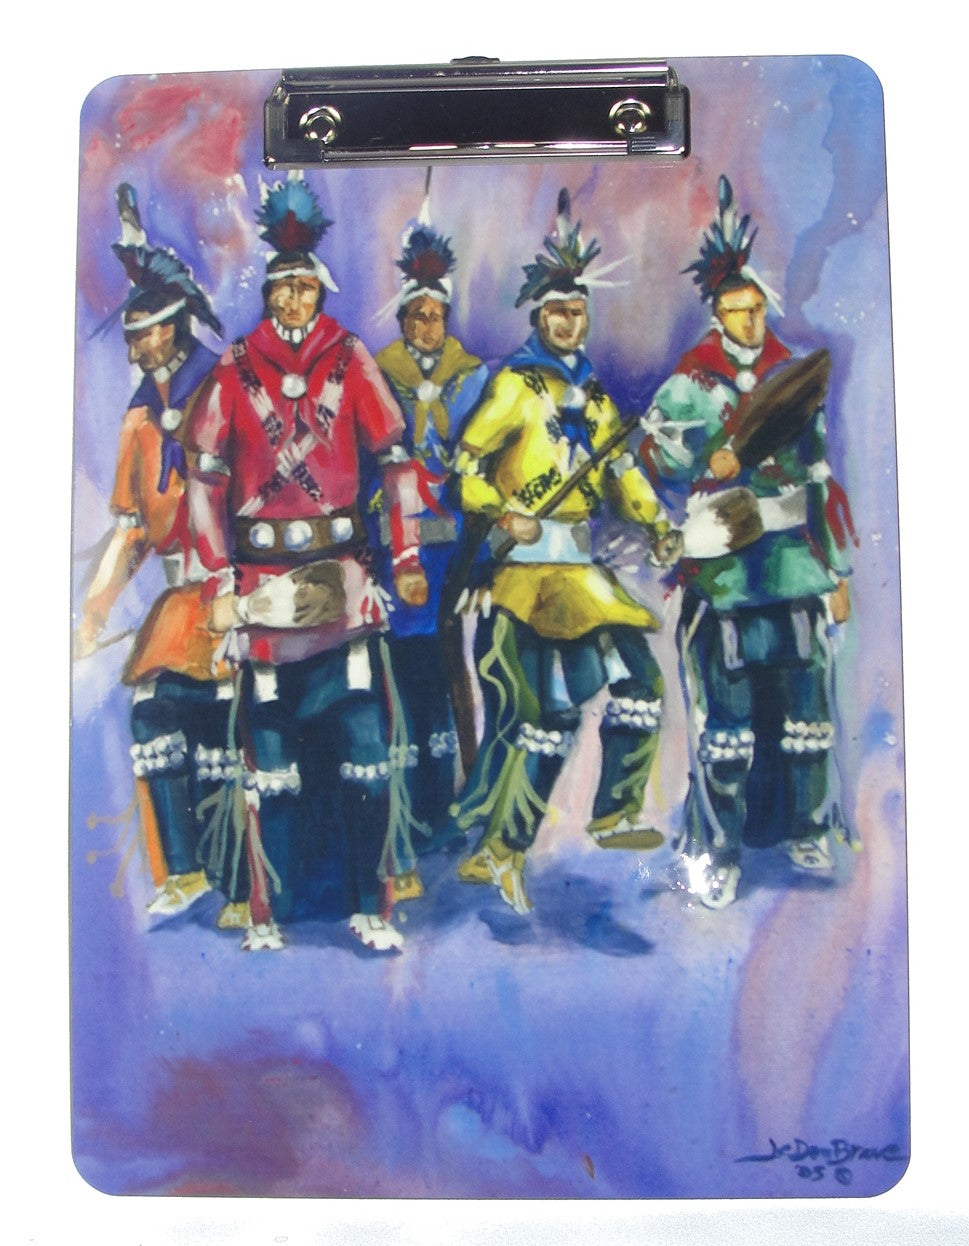 Clipboard, 5 Osage Straight Dancers